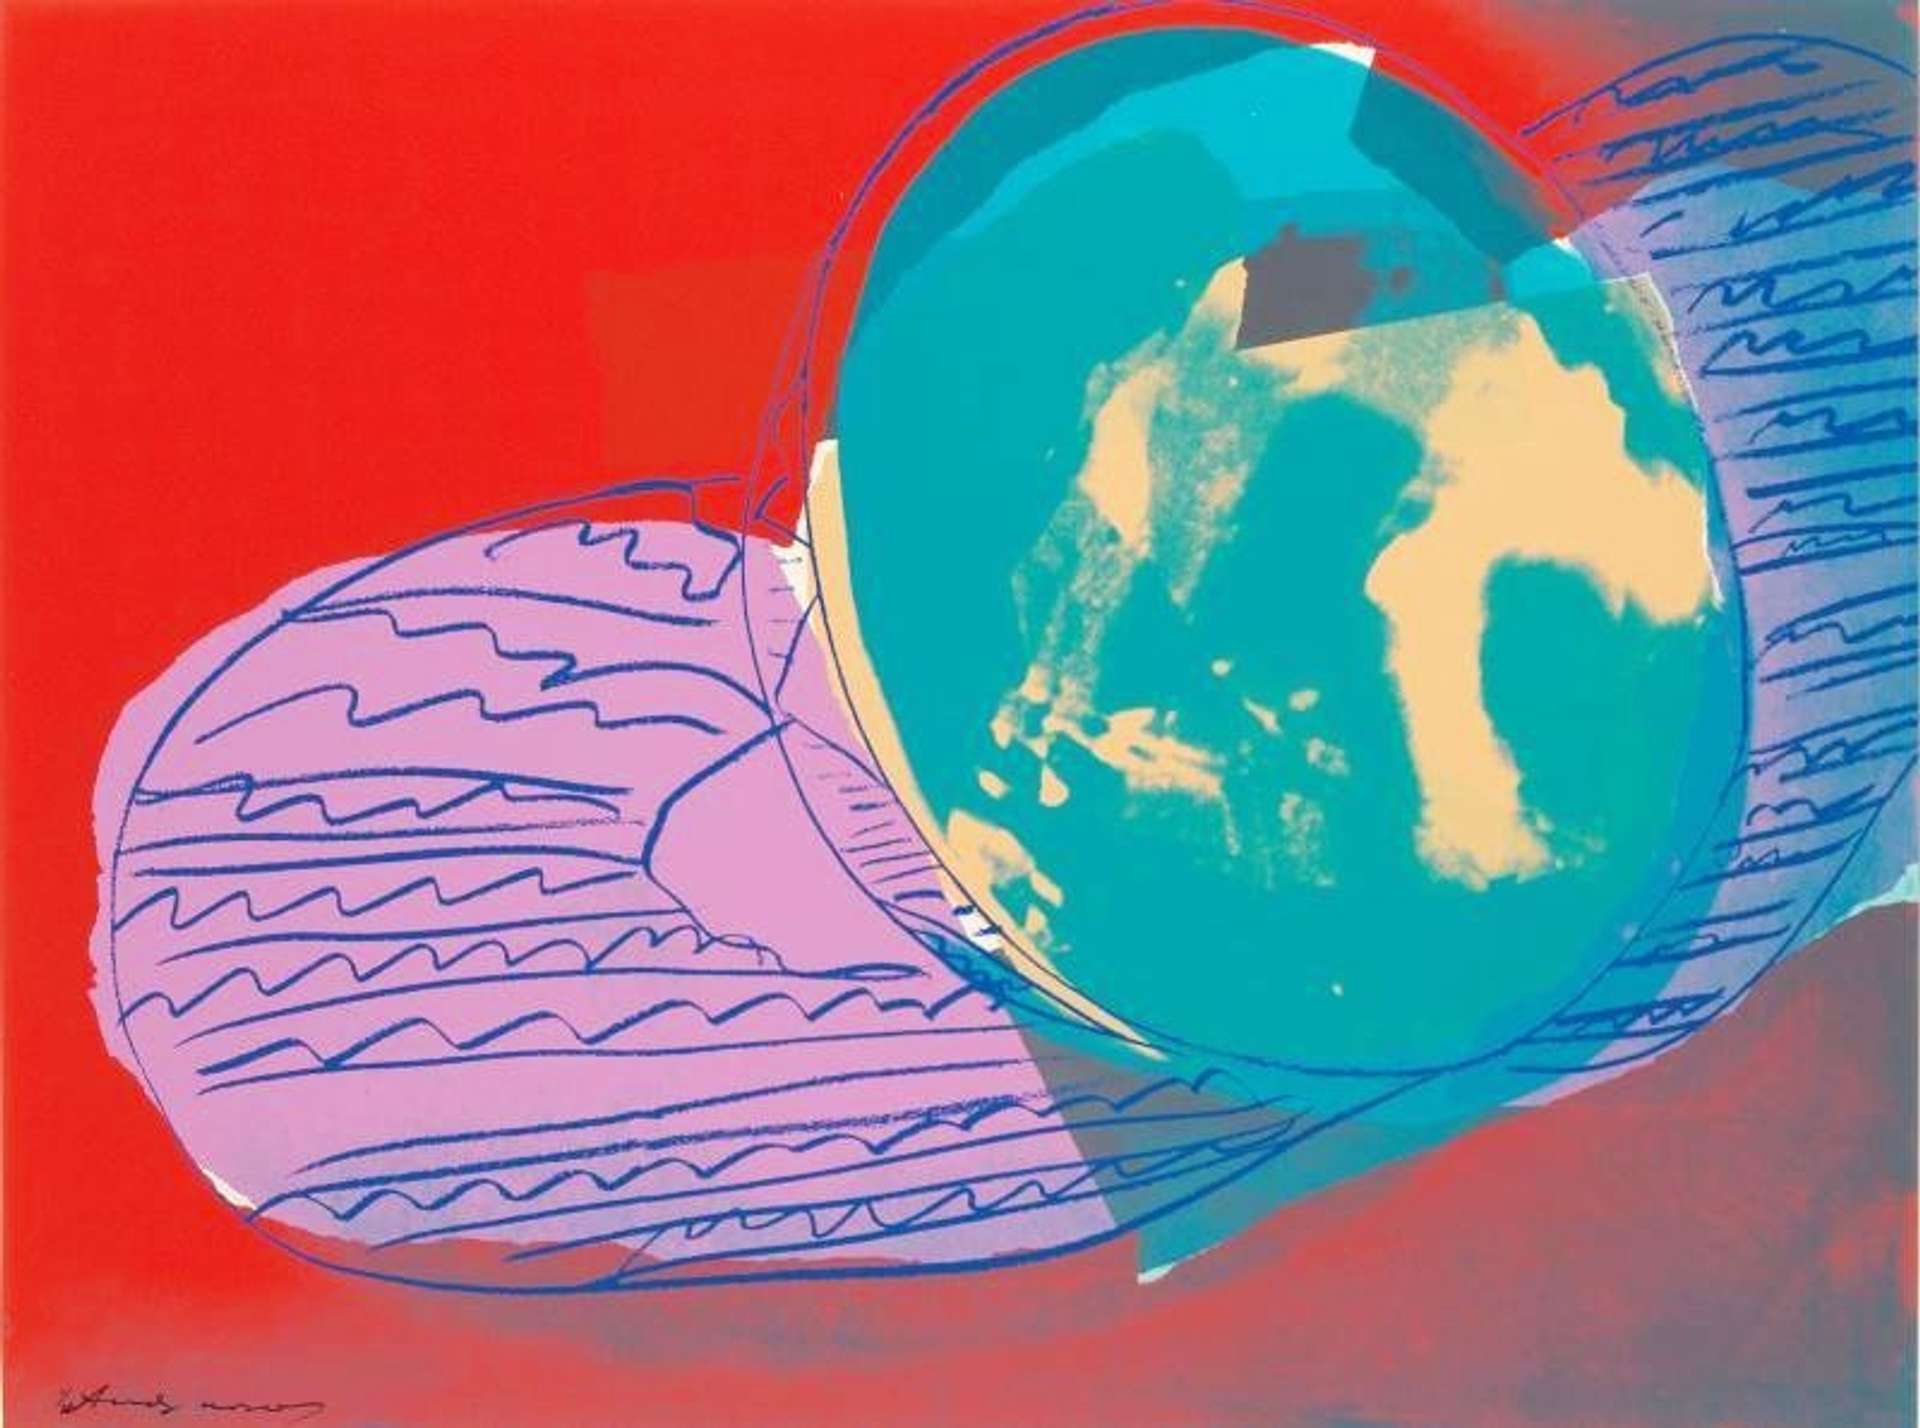 10 Facts About Andy Warhol's Gems